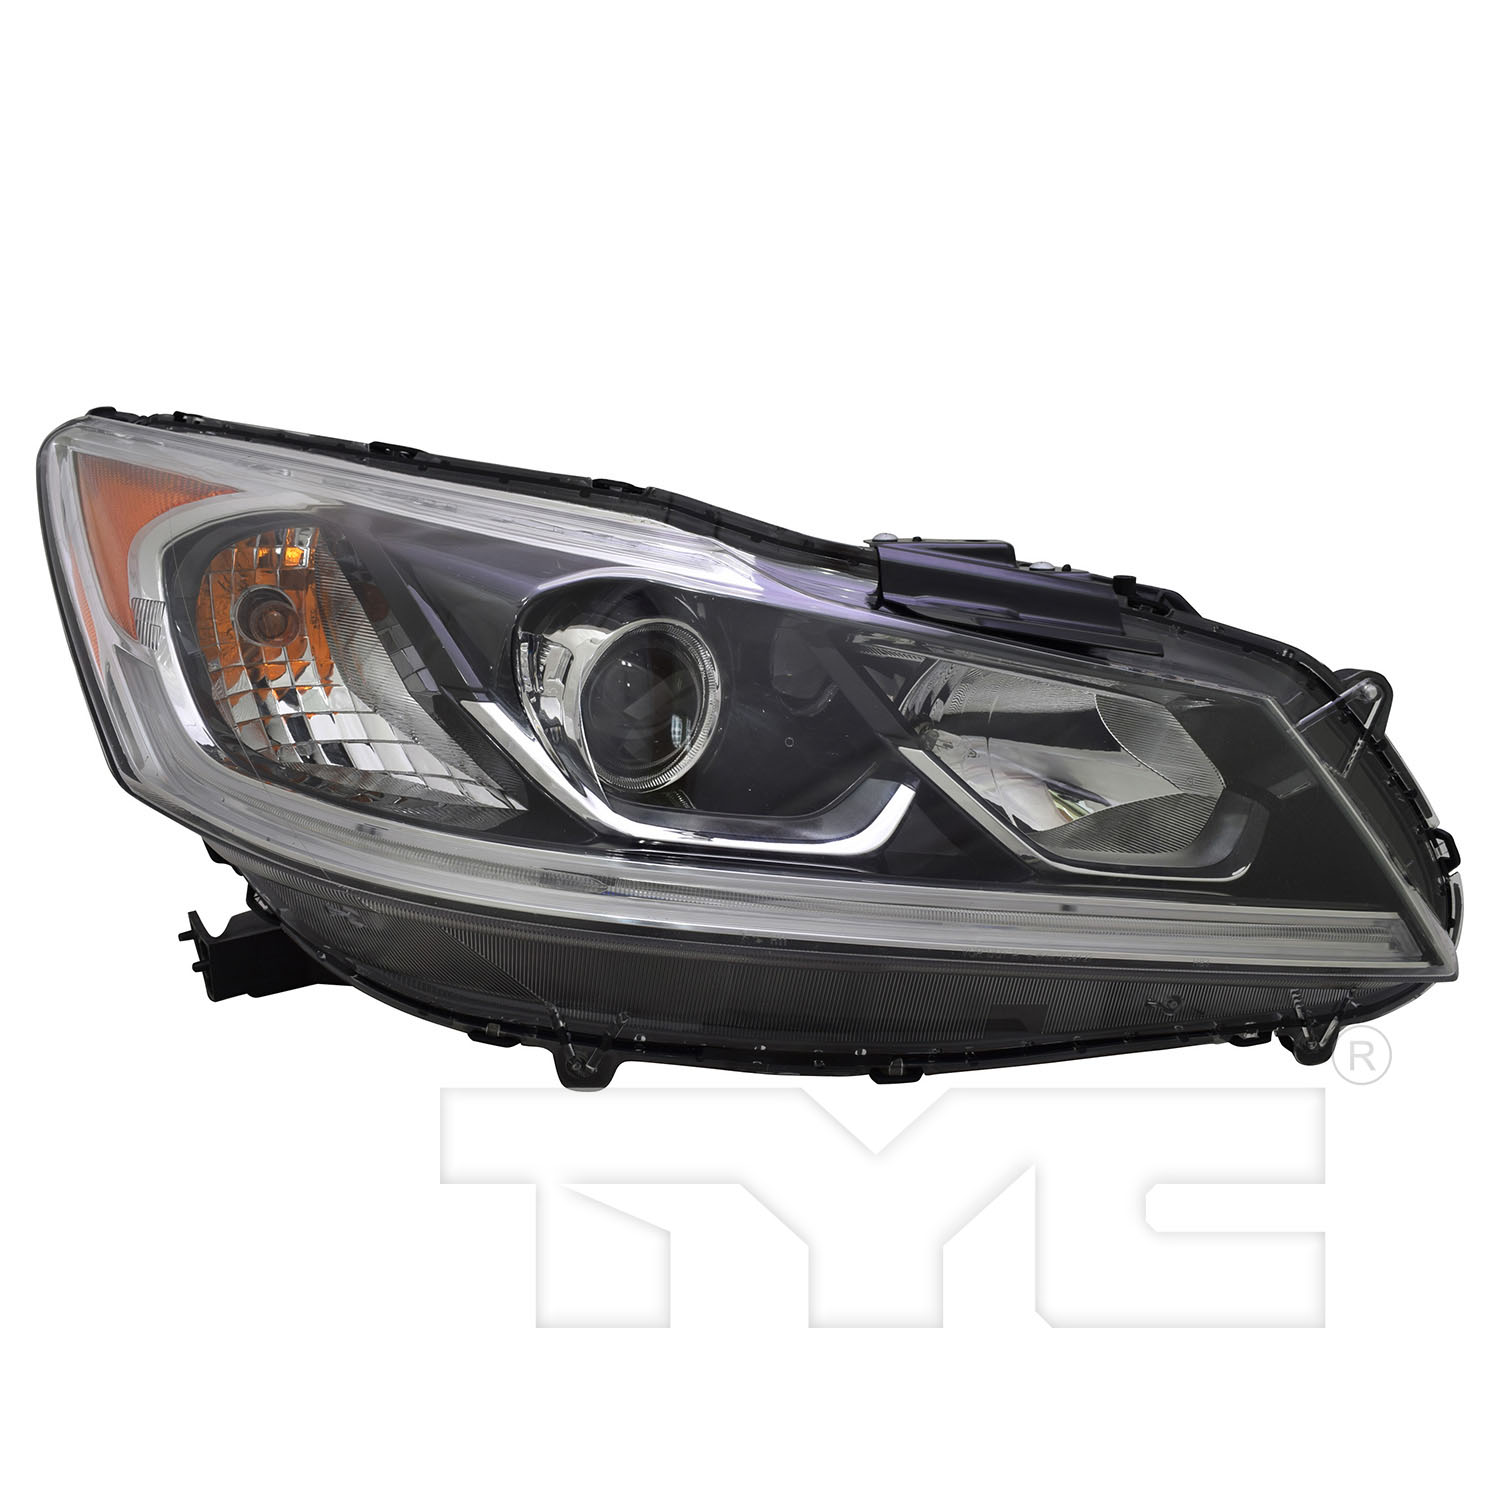 Aftermarket HEADLIGHTS for HONDA - ACCORD, ACCORD,16-17,RT Headlamp assy composite